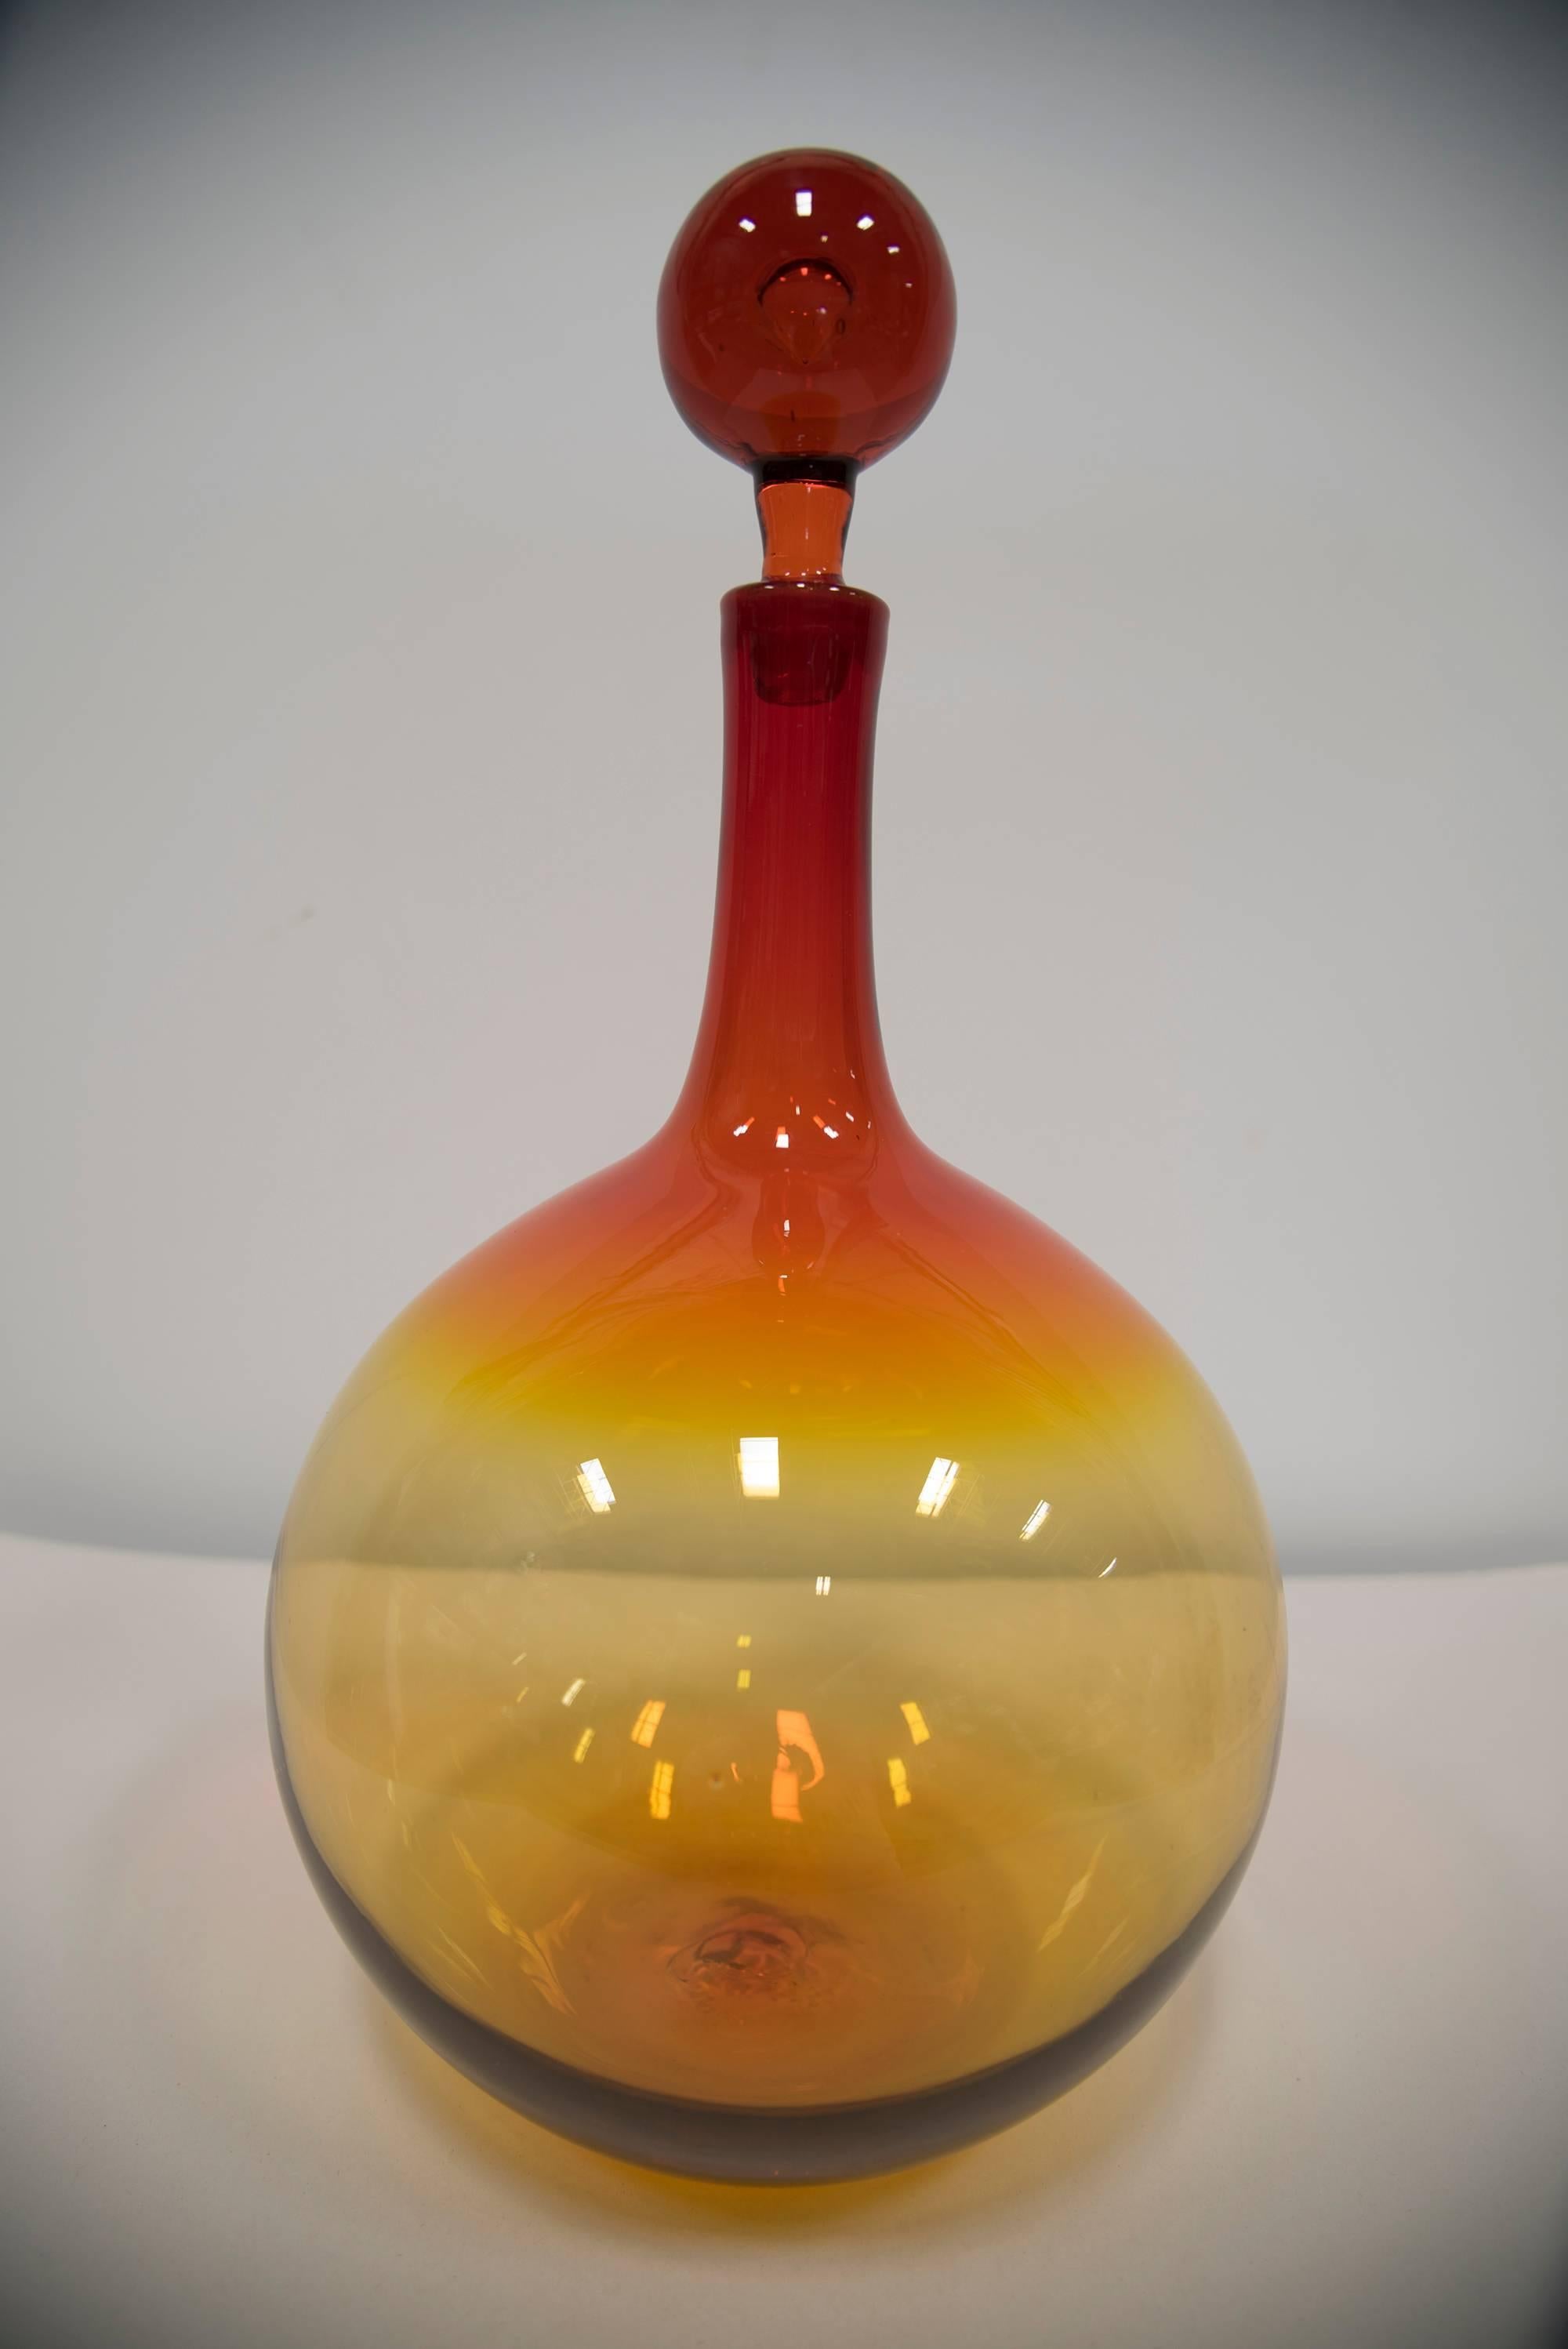 A beautiful very large Blenko Glass bottle or decanter designed by Wayne Husted.